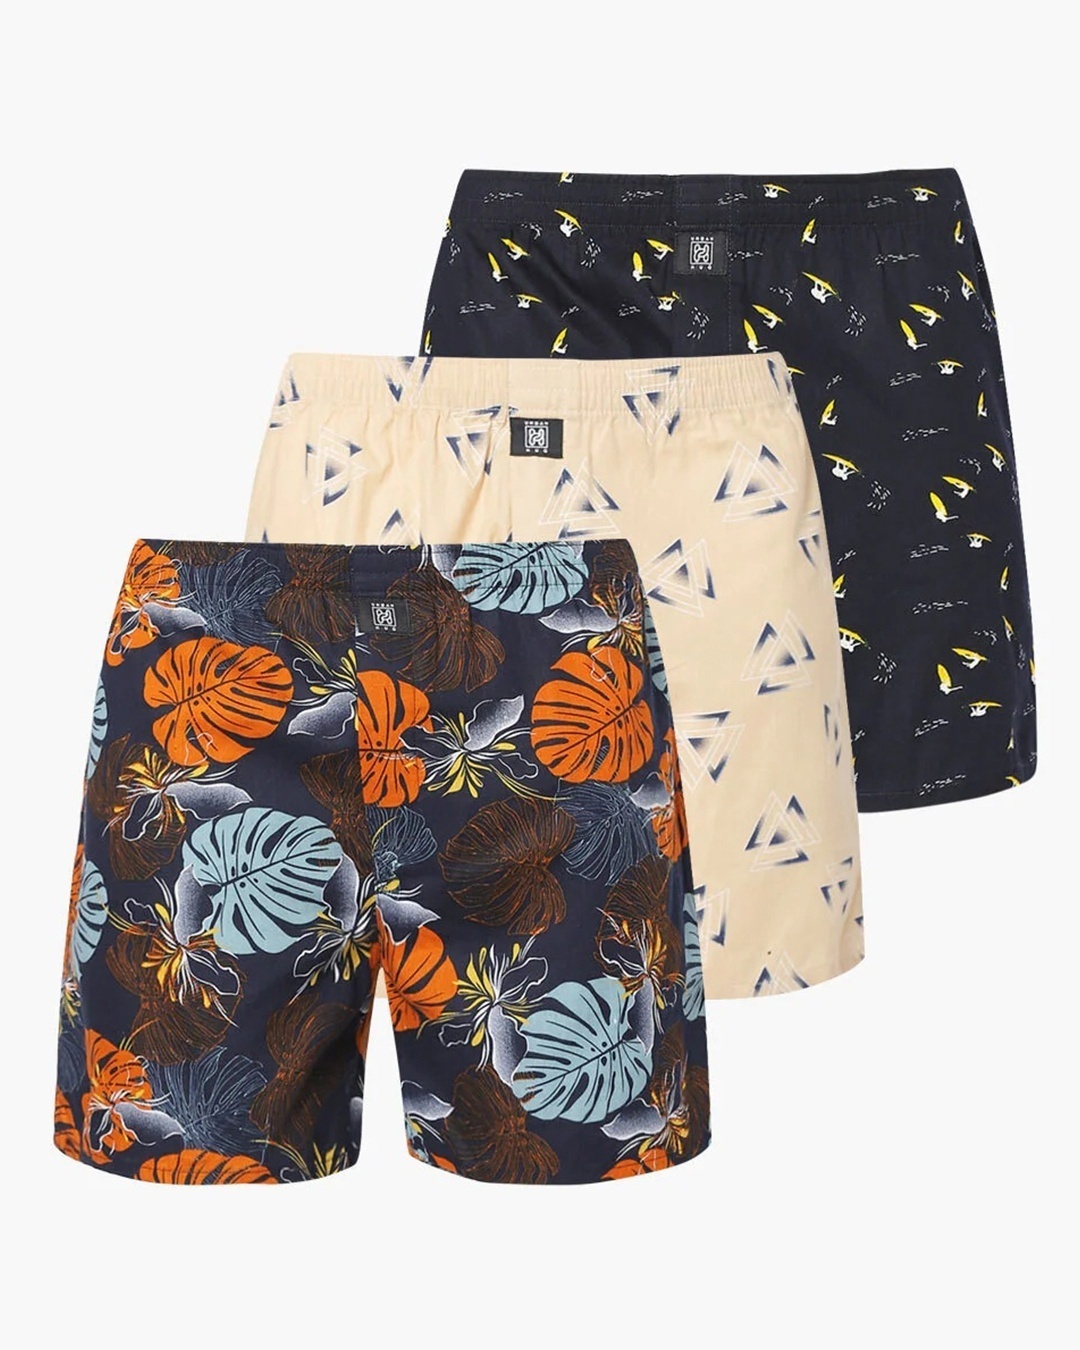 Shop Men's All Over Printed Boxers (Pack of 3)-Front